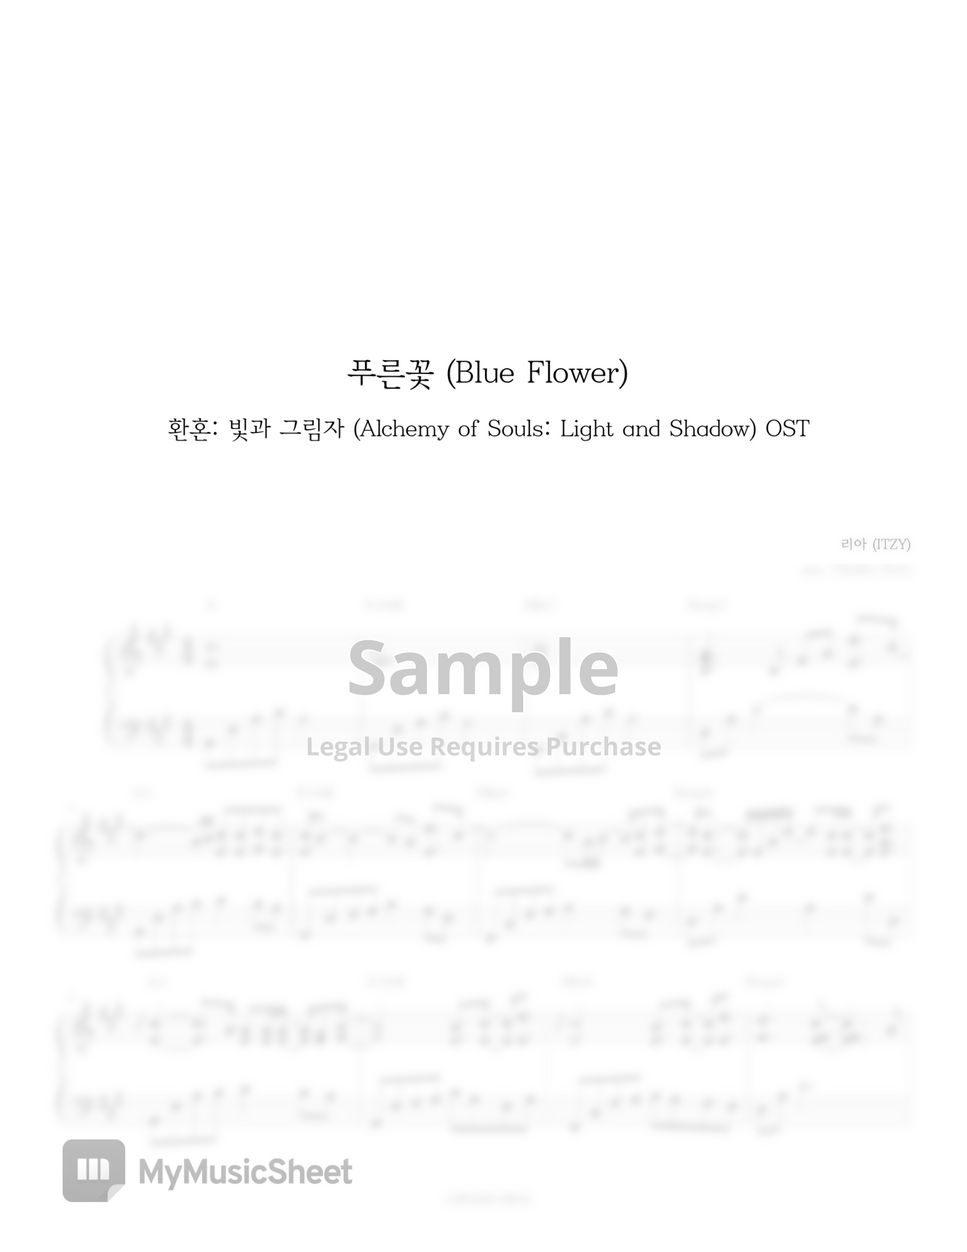 Alchemy of Souls, Light and Shadow (환혼, 빛과 그림자 OST) - LIA (ITZY) - Blue Flower by Piano Hug